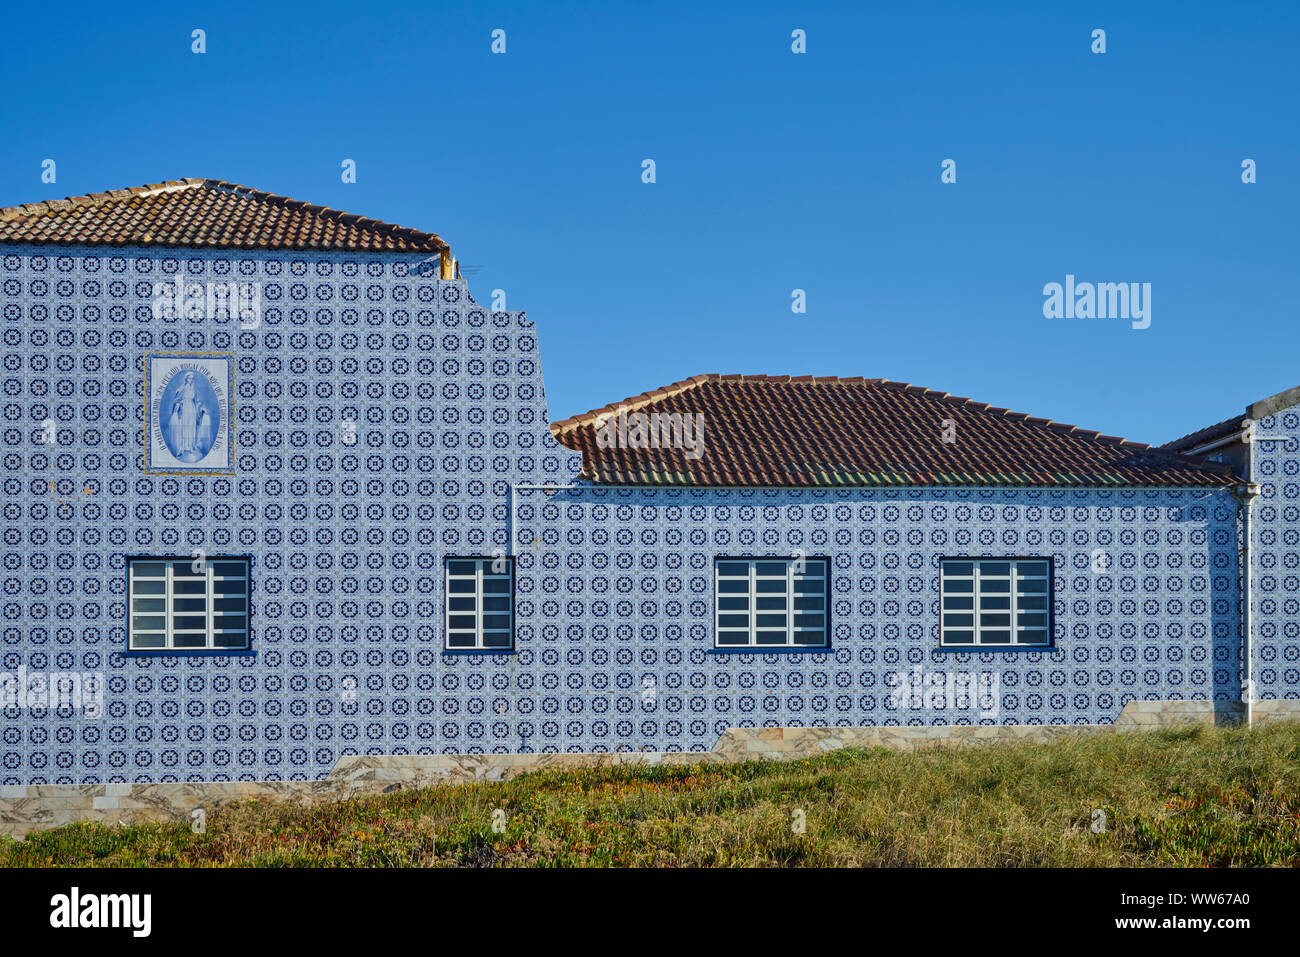 Monastery with white blue tiles in front of blue sky Stock Photo